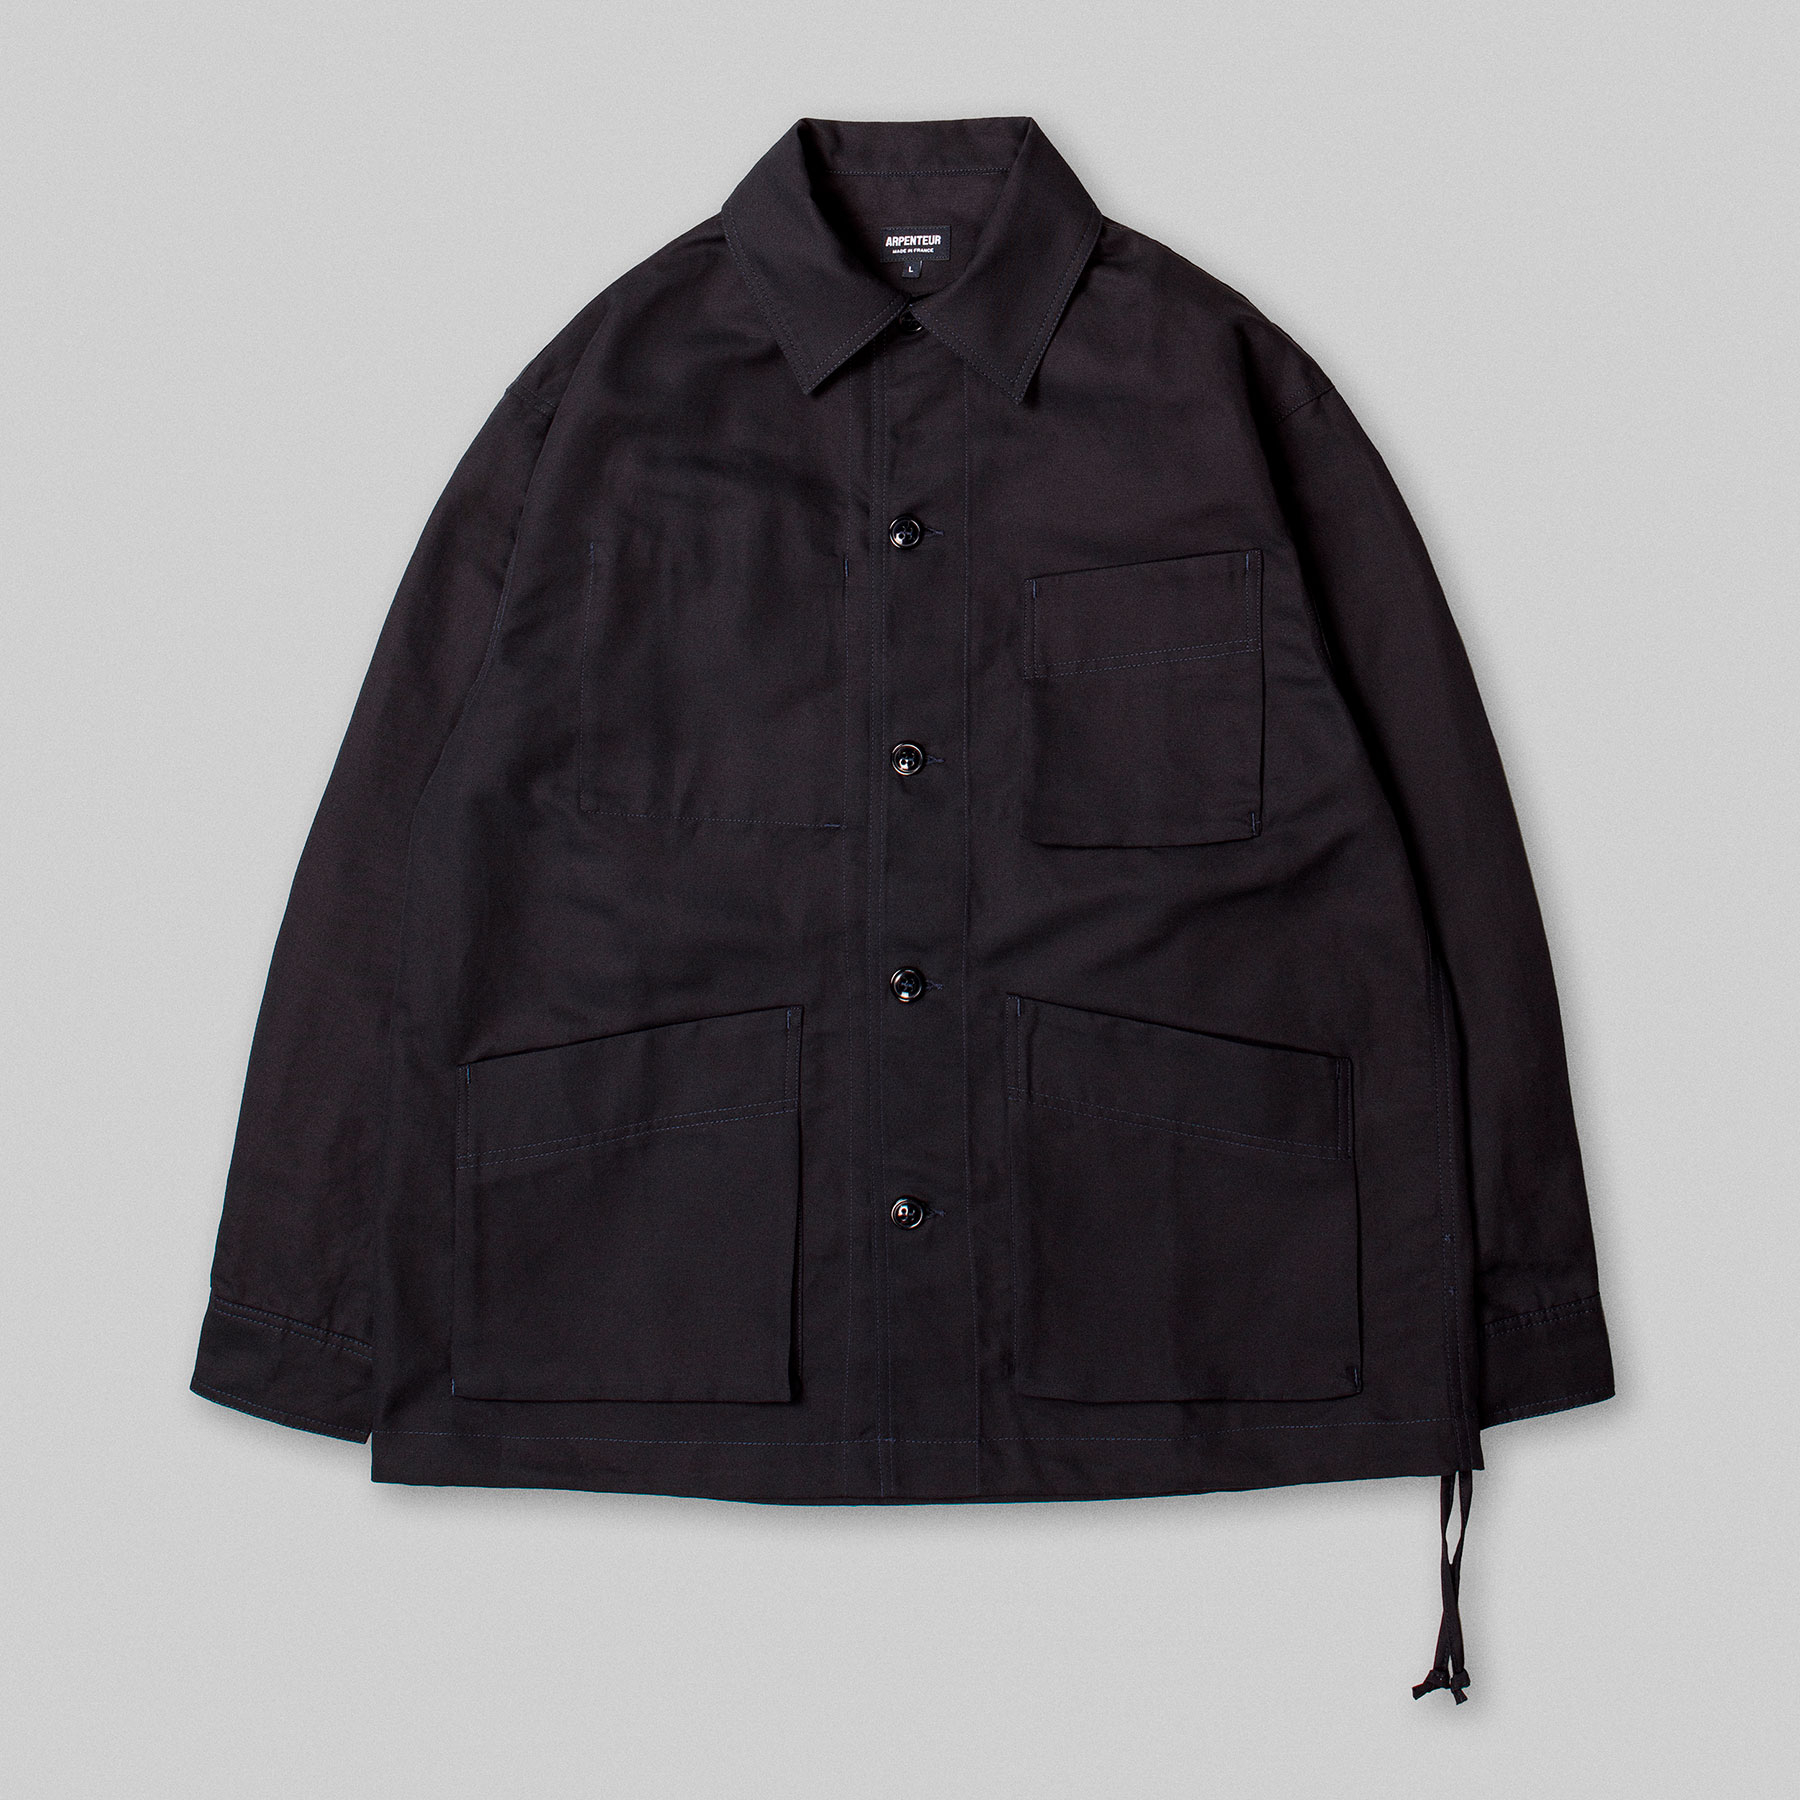 ADN jacket by ARPENTEUR in Midnight color